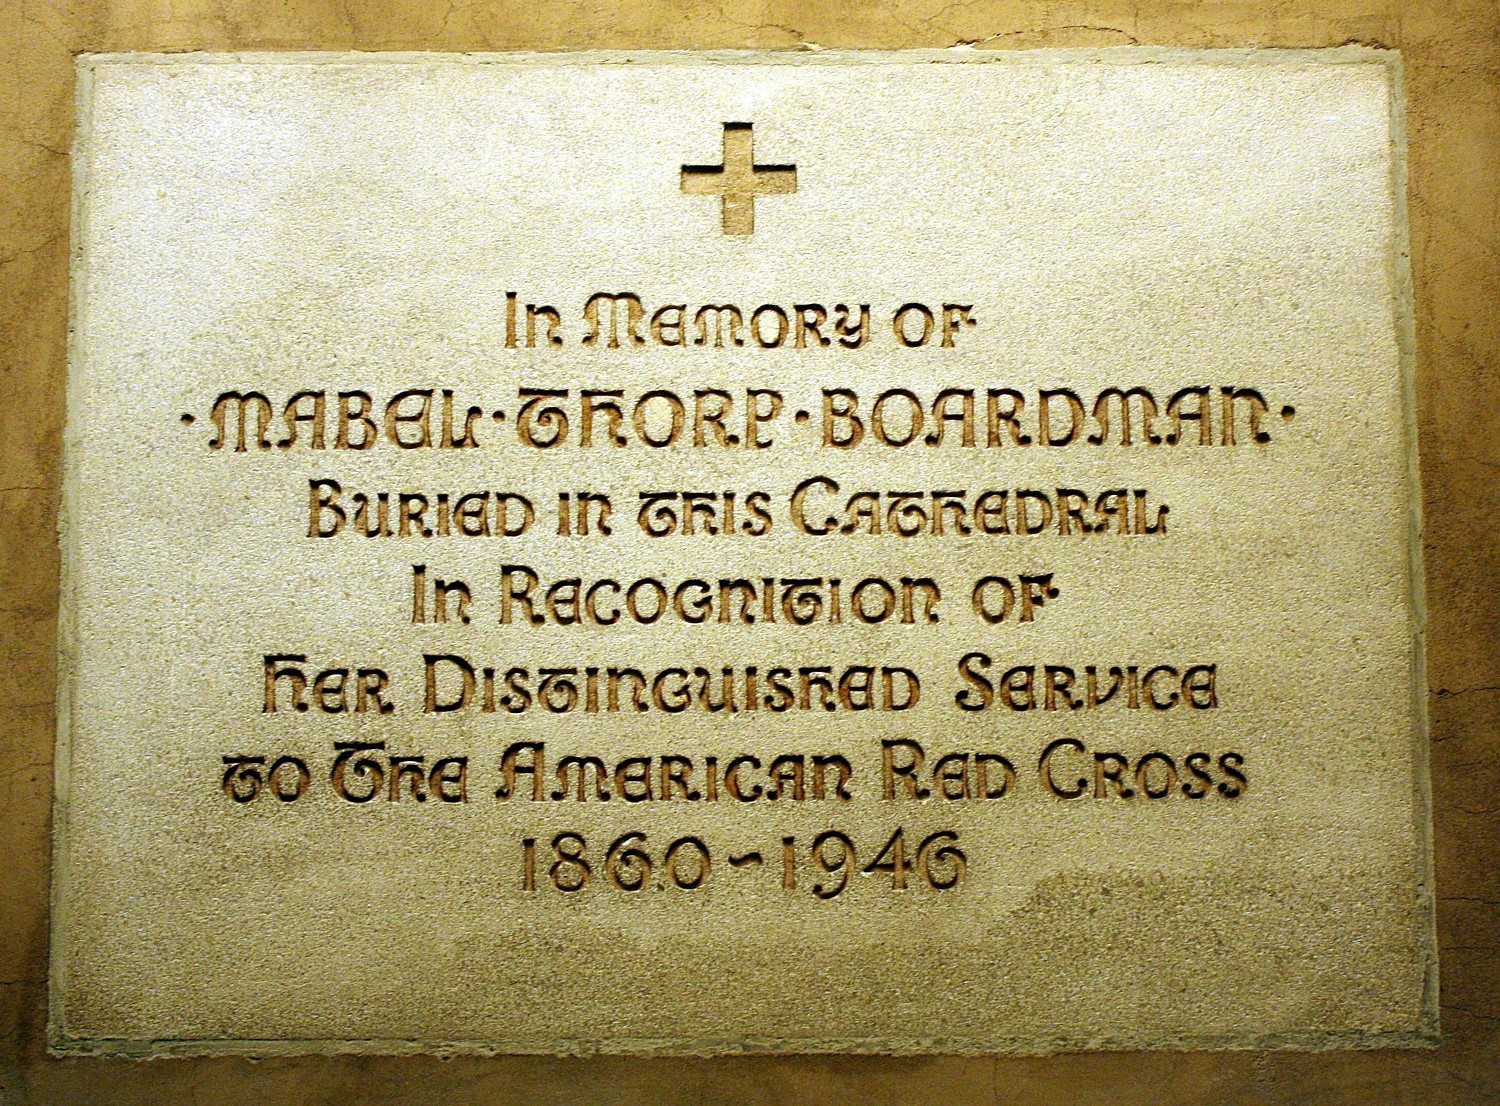 volunteer The Boardman Memorial Bay in Washington’s National Cathedral, the place of her burial, was dedicated in June, 1958.